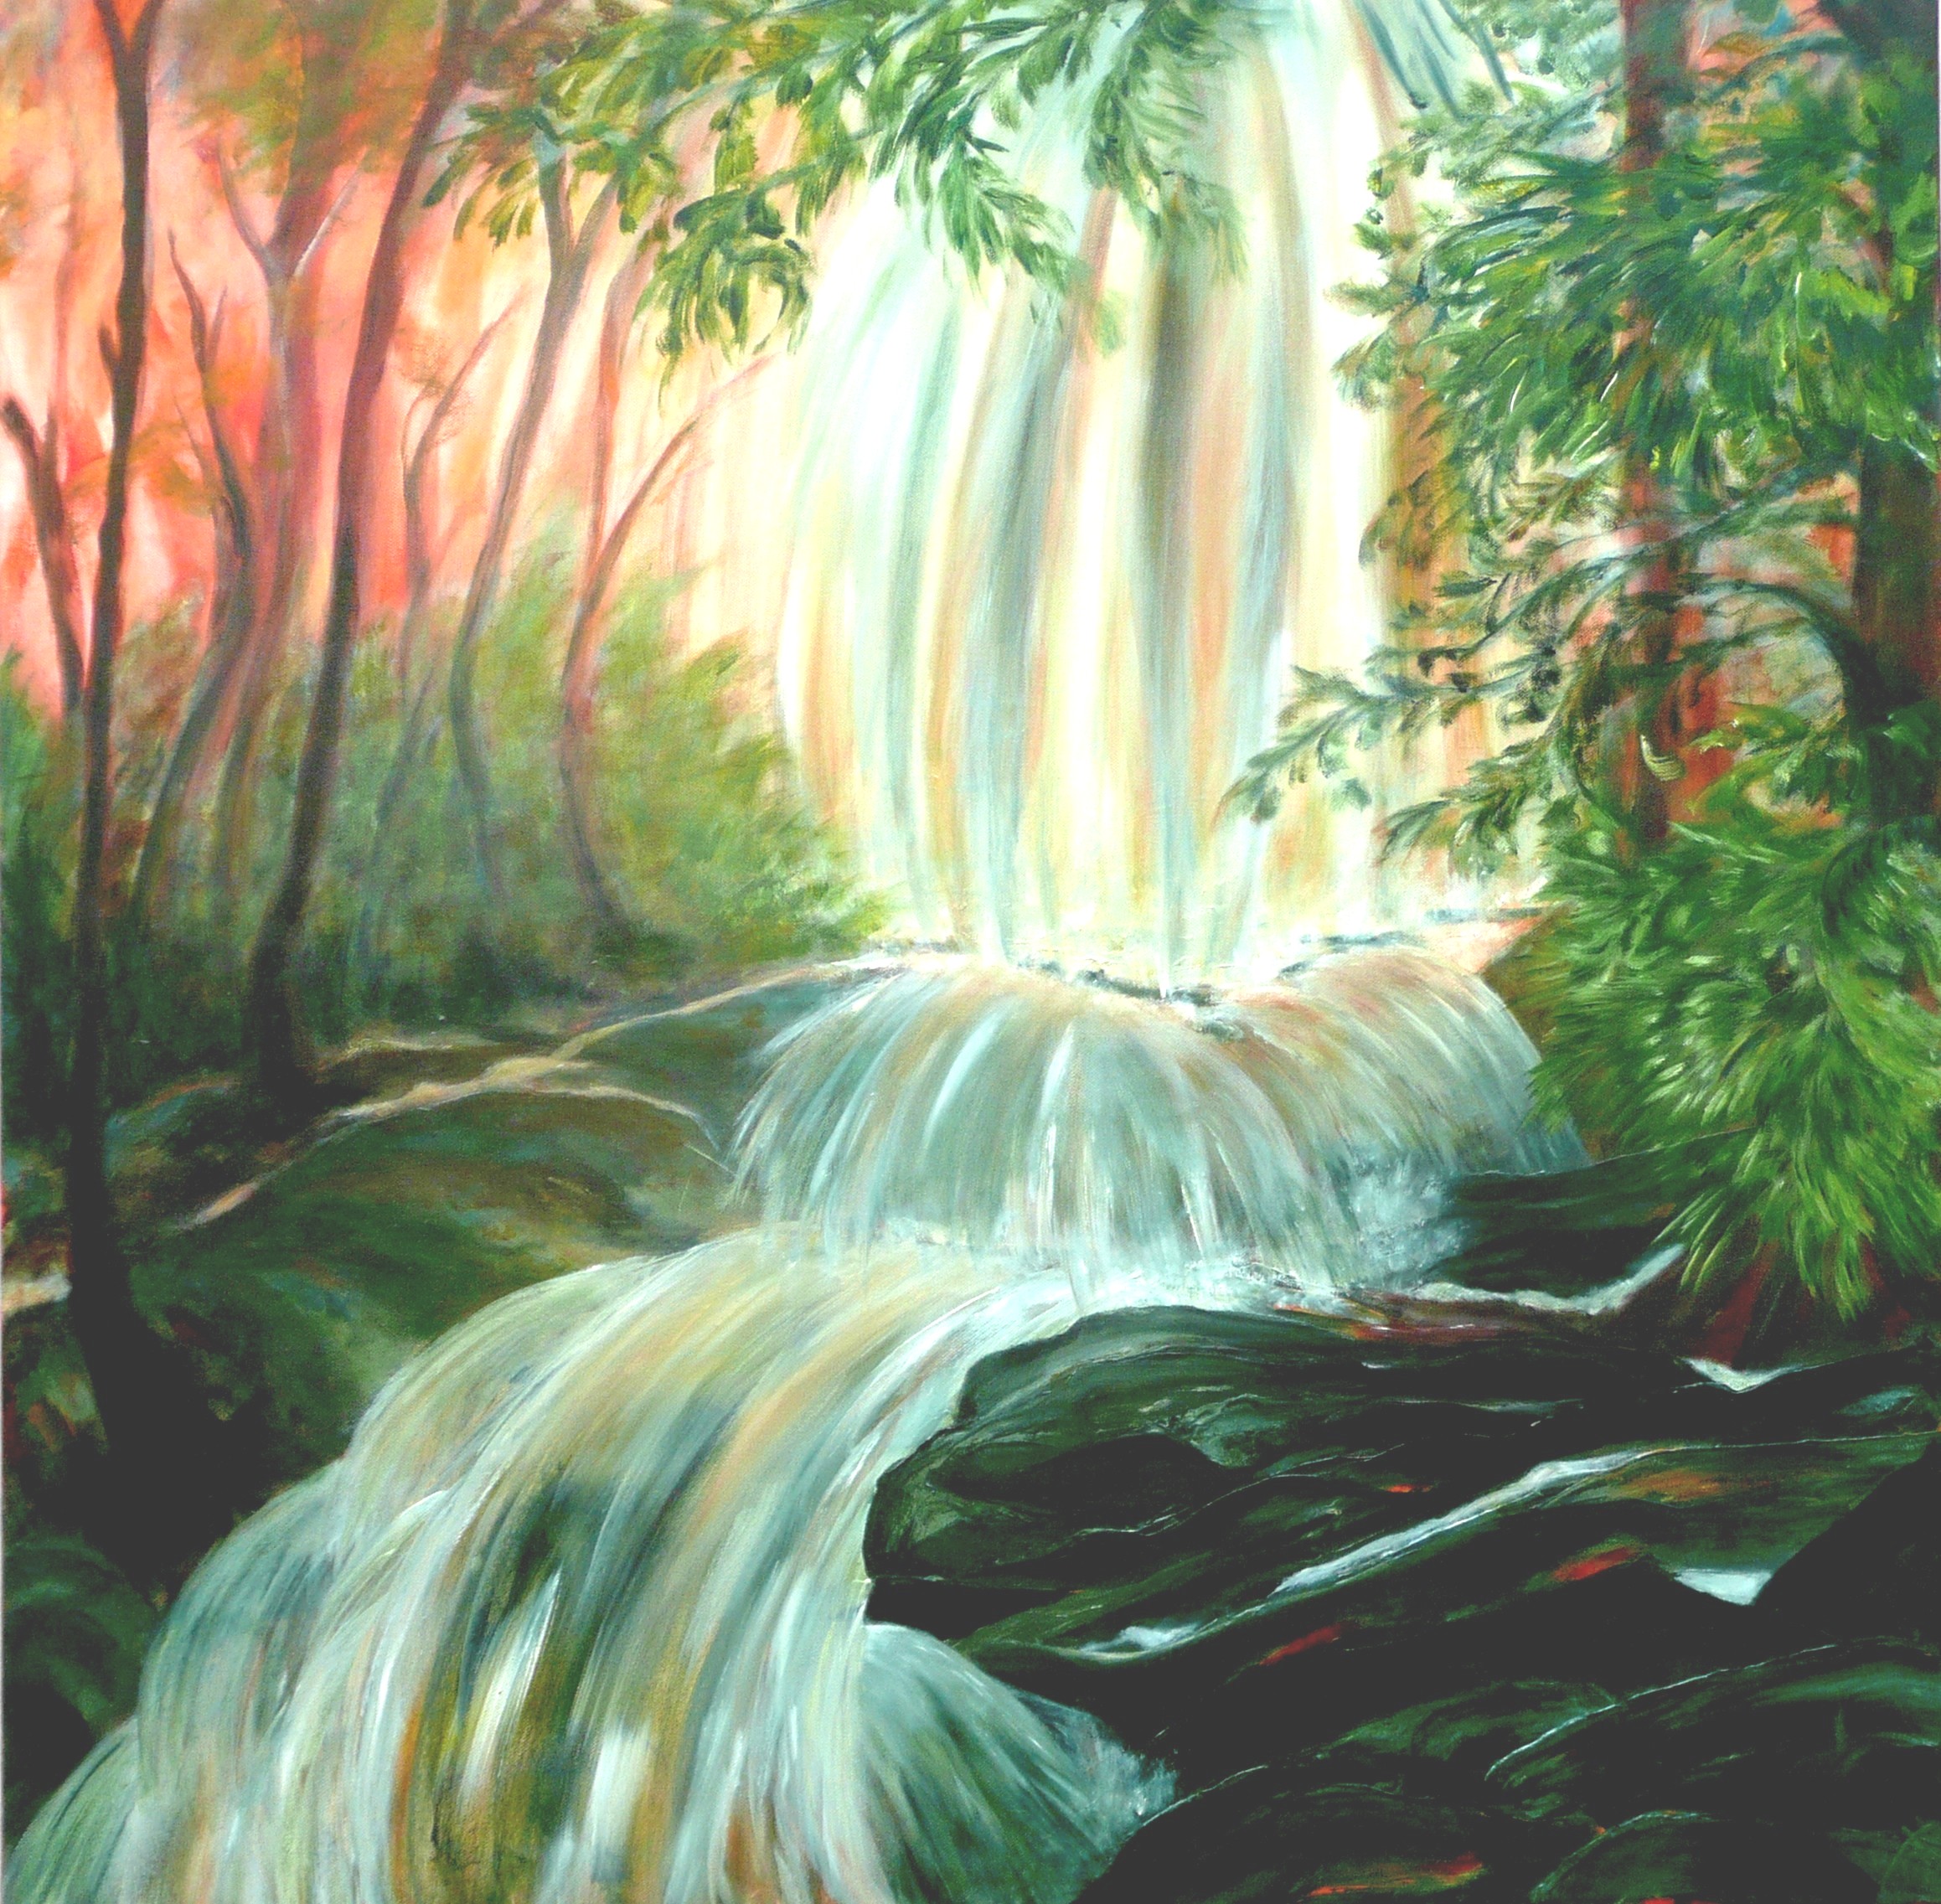 My Forest Waterfall 90x90cm 36x36ins